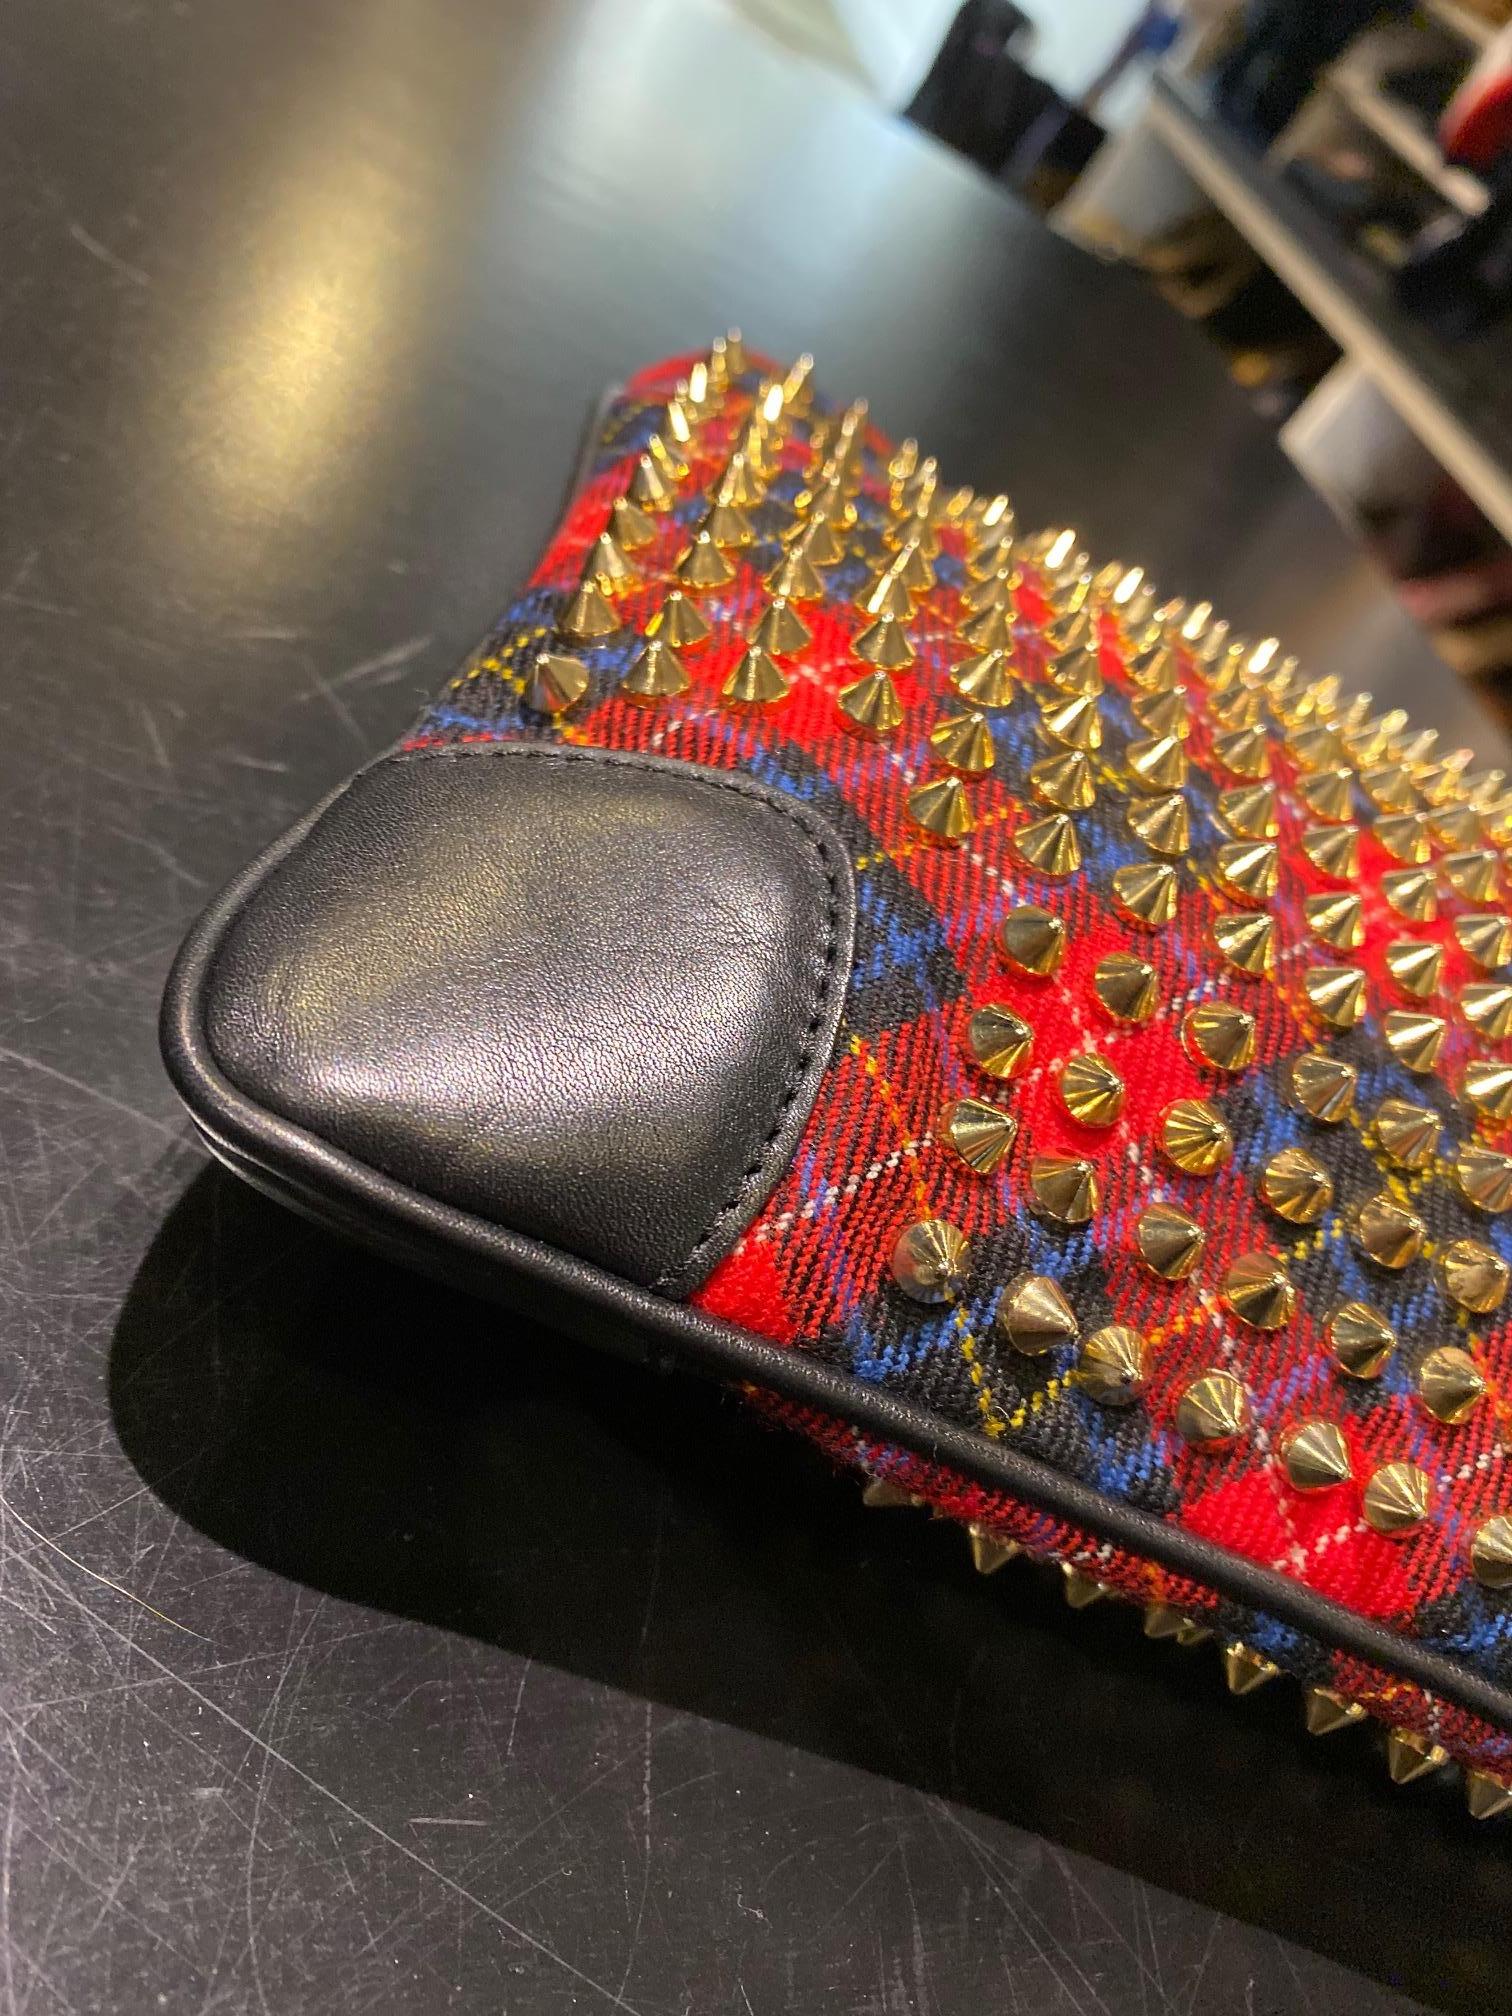 Christian Louboutin Plaid Spiked Clutch For Sale 2